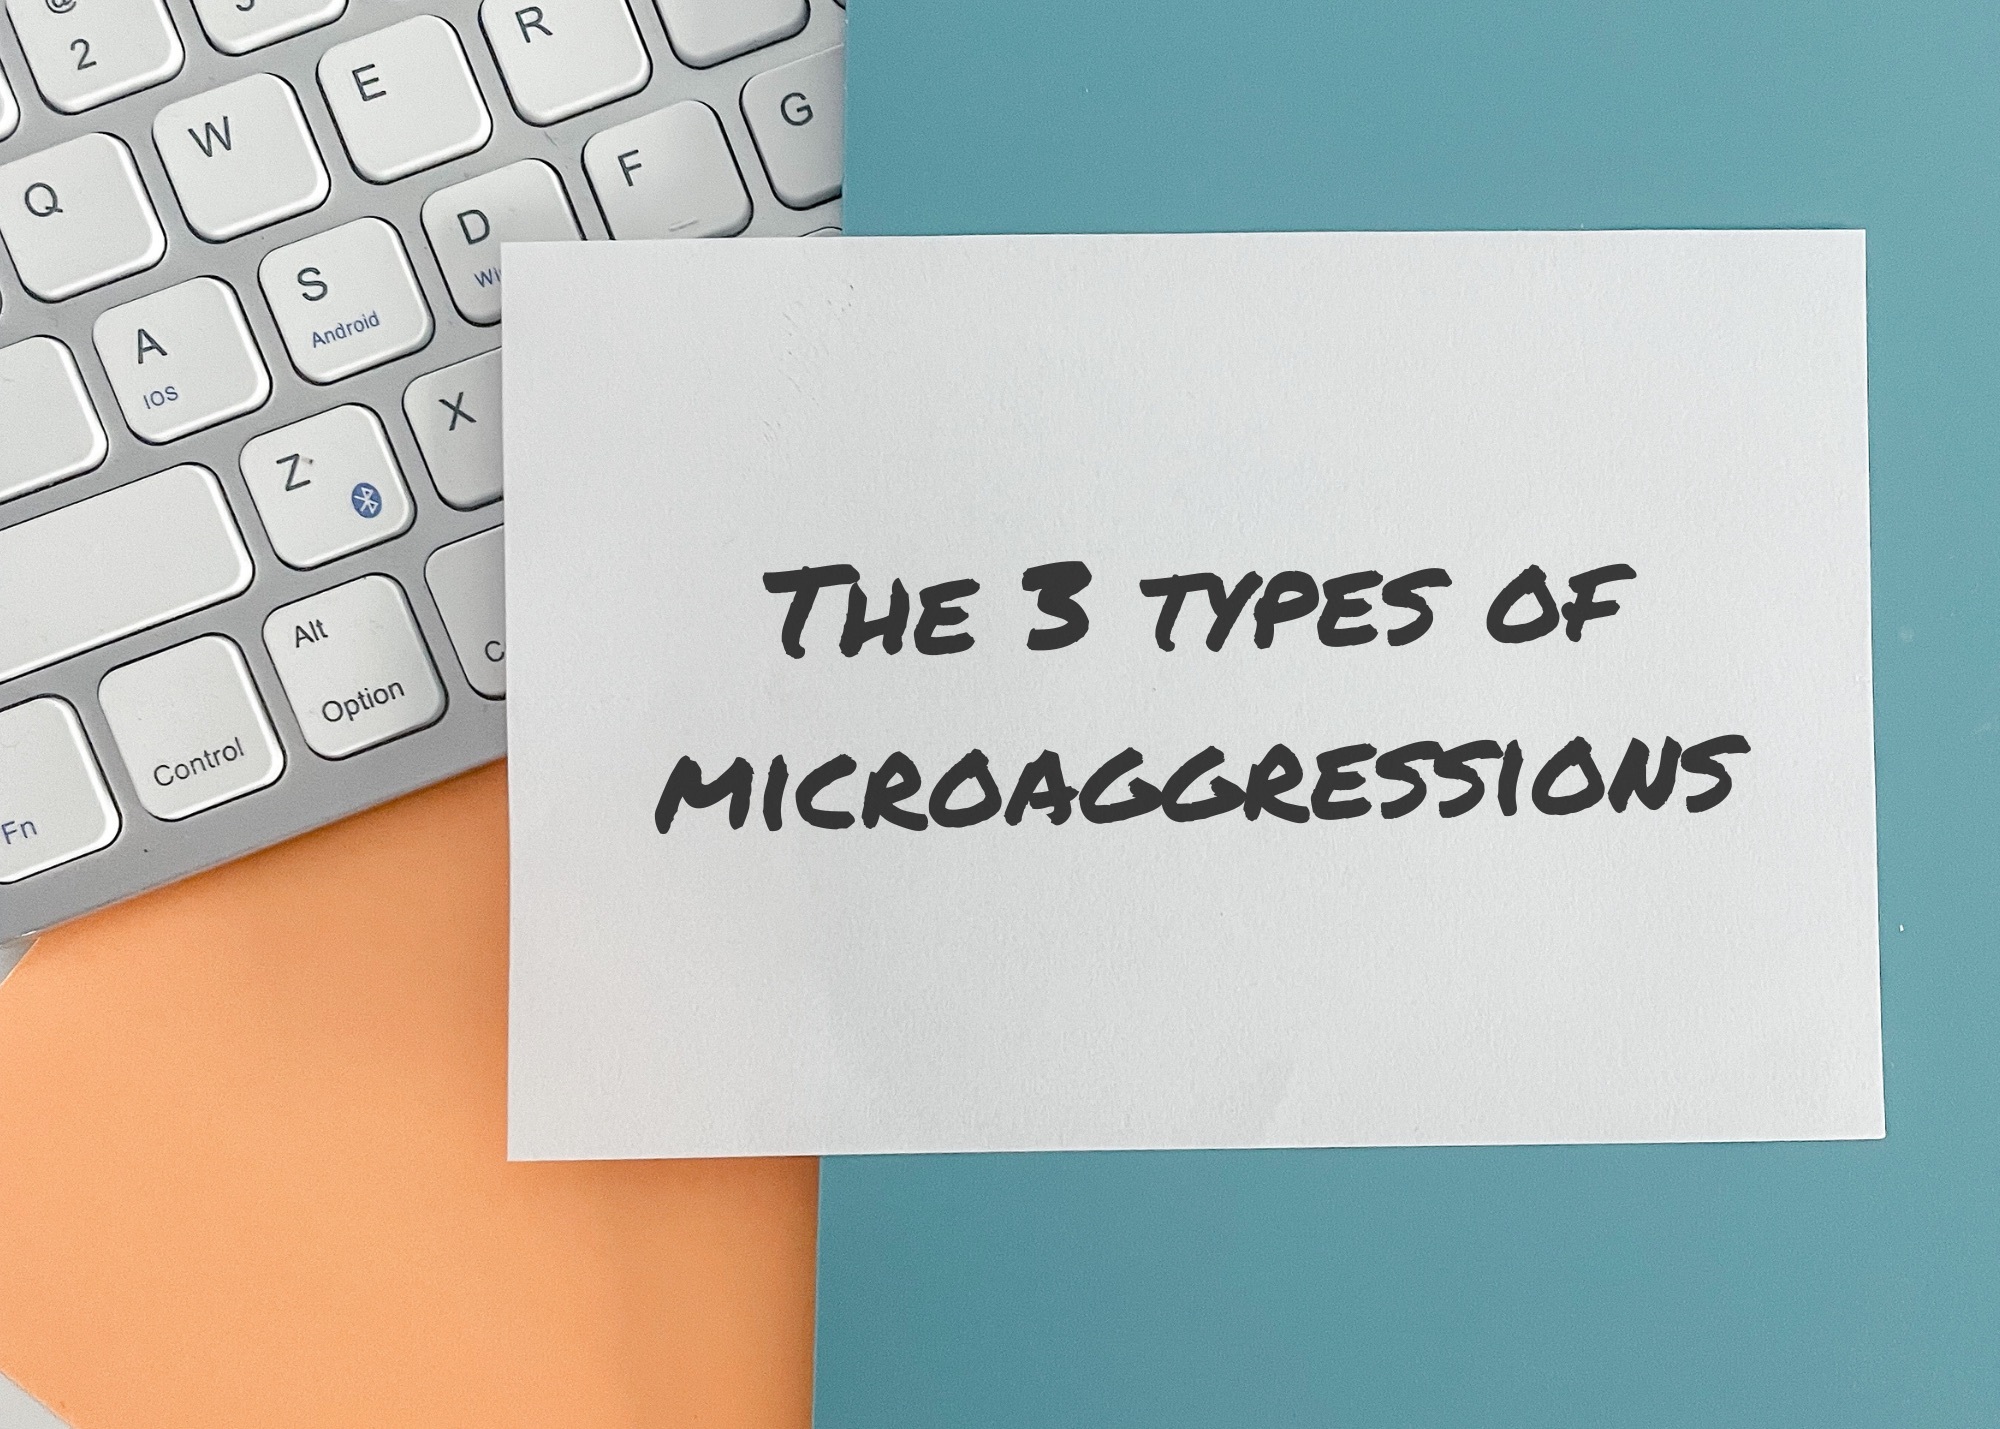 The 3 Types of Microaggressions